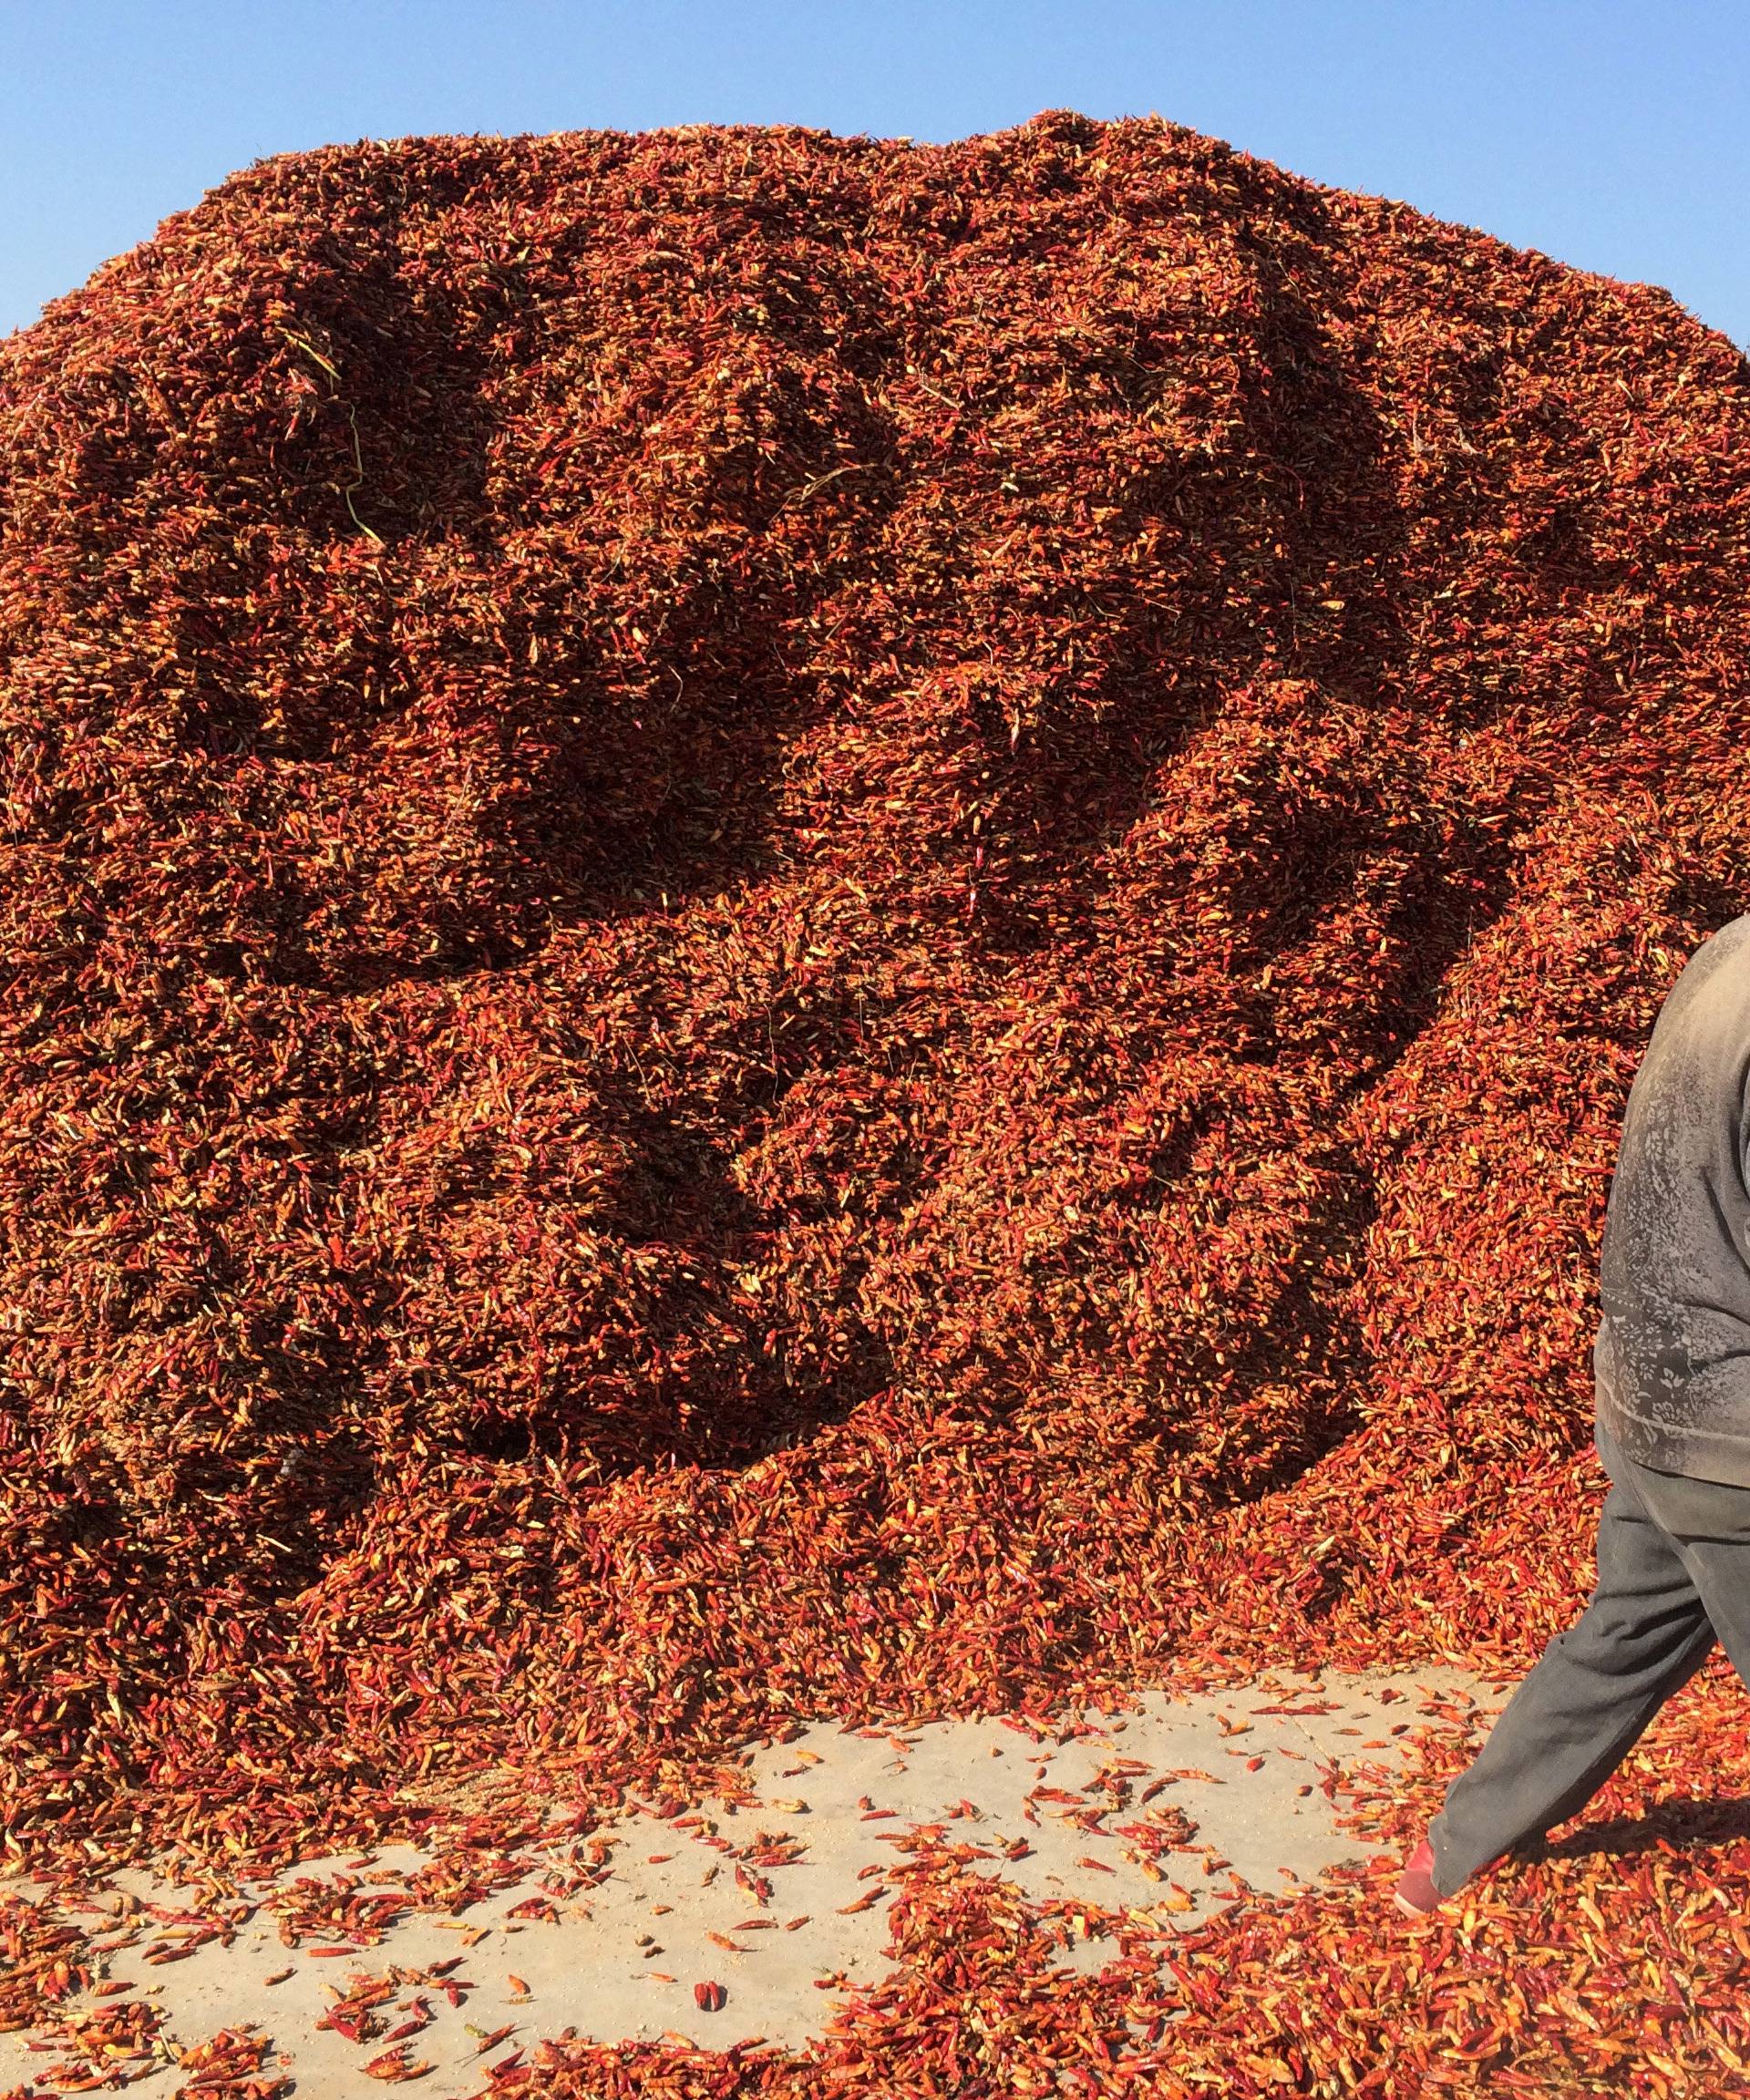 A staff member works near a pile of chillies at a market in Jinxiang